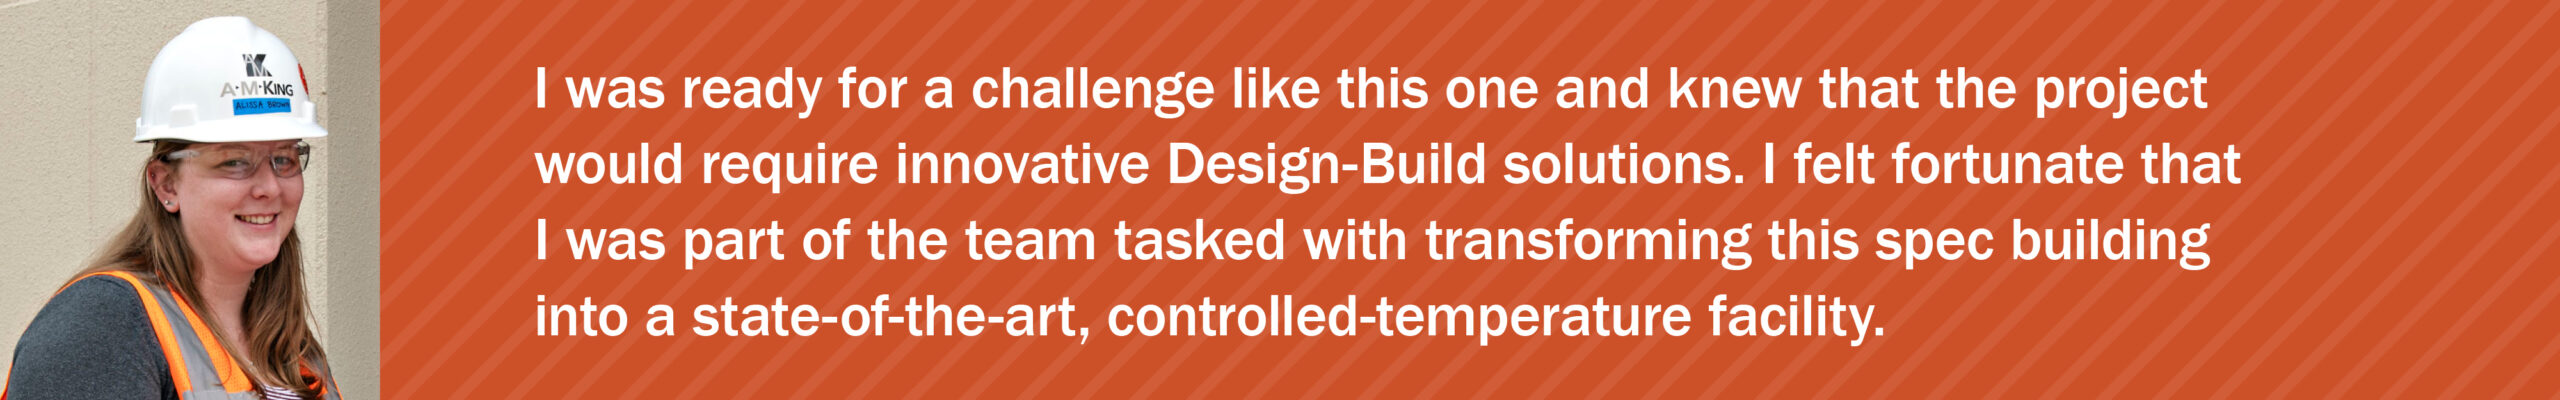 Design-Build Solutions: Alissa Brown was ready for a challenge like this one.